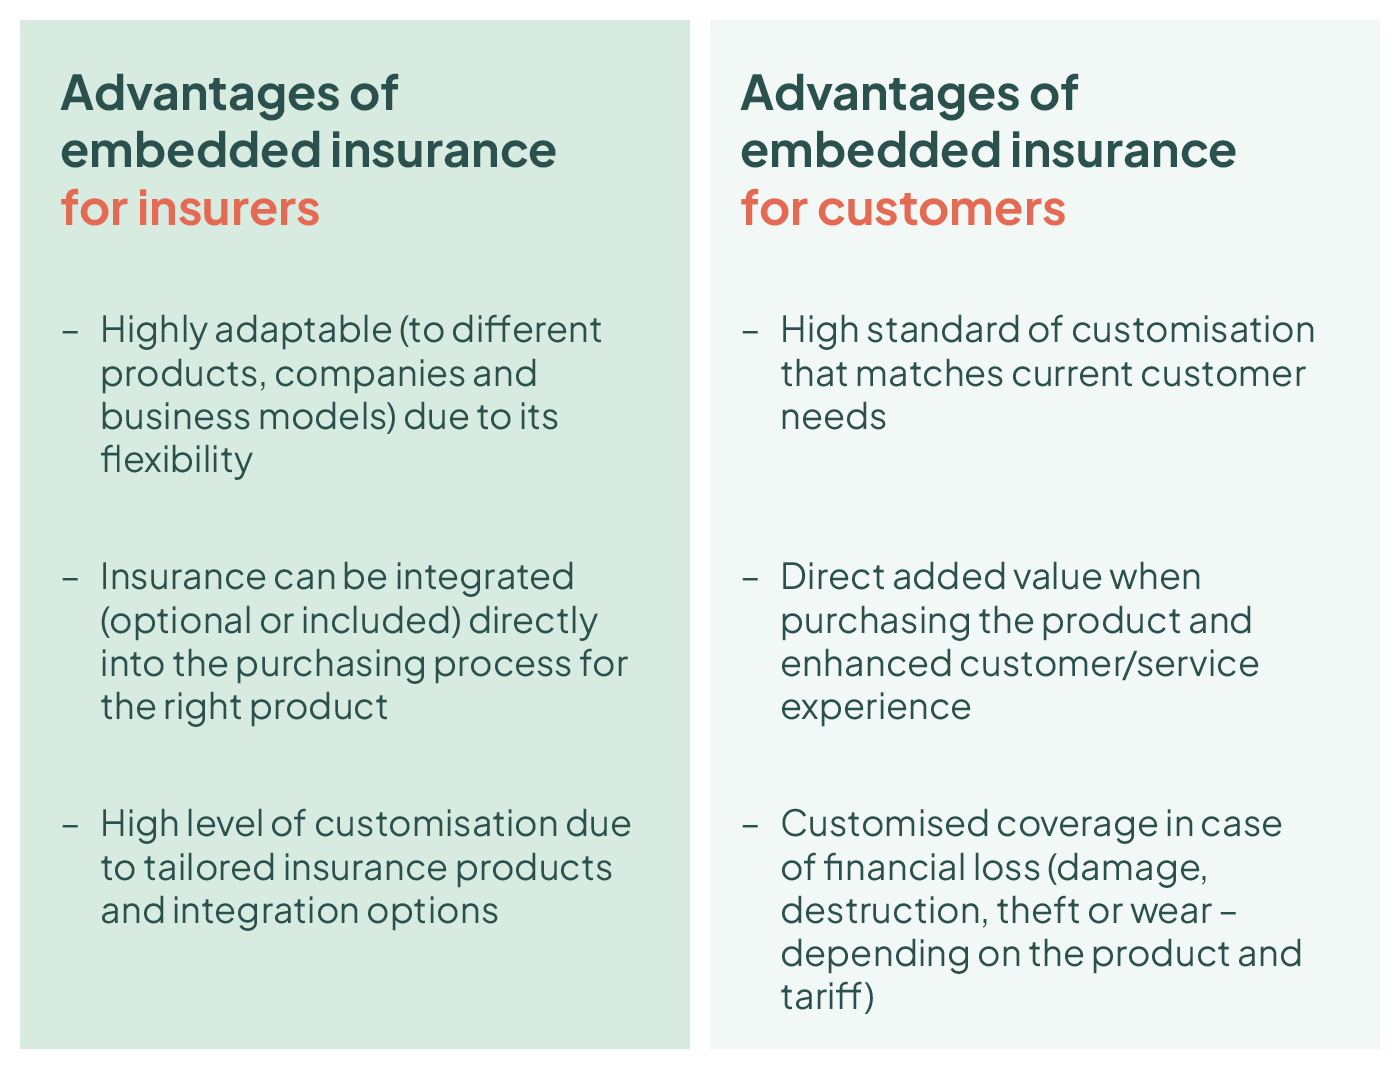 Comparison of the advantages of embedded insurance